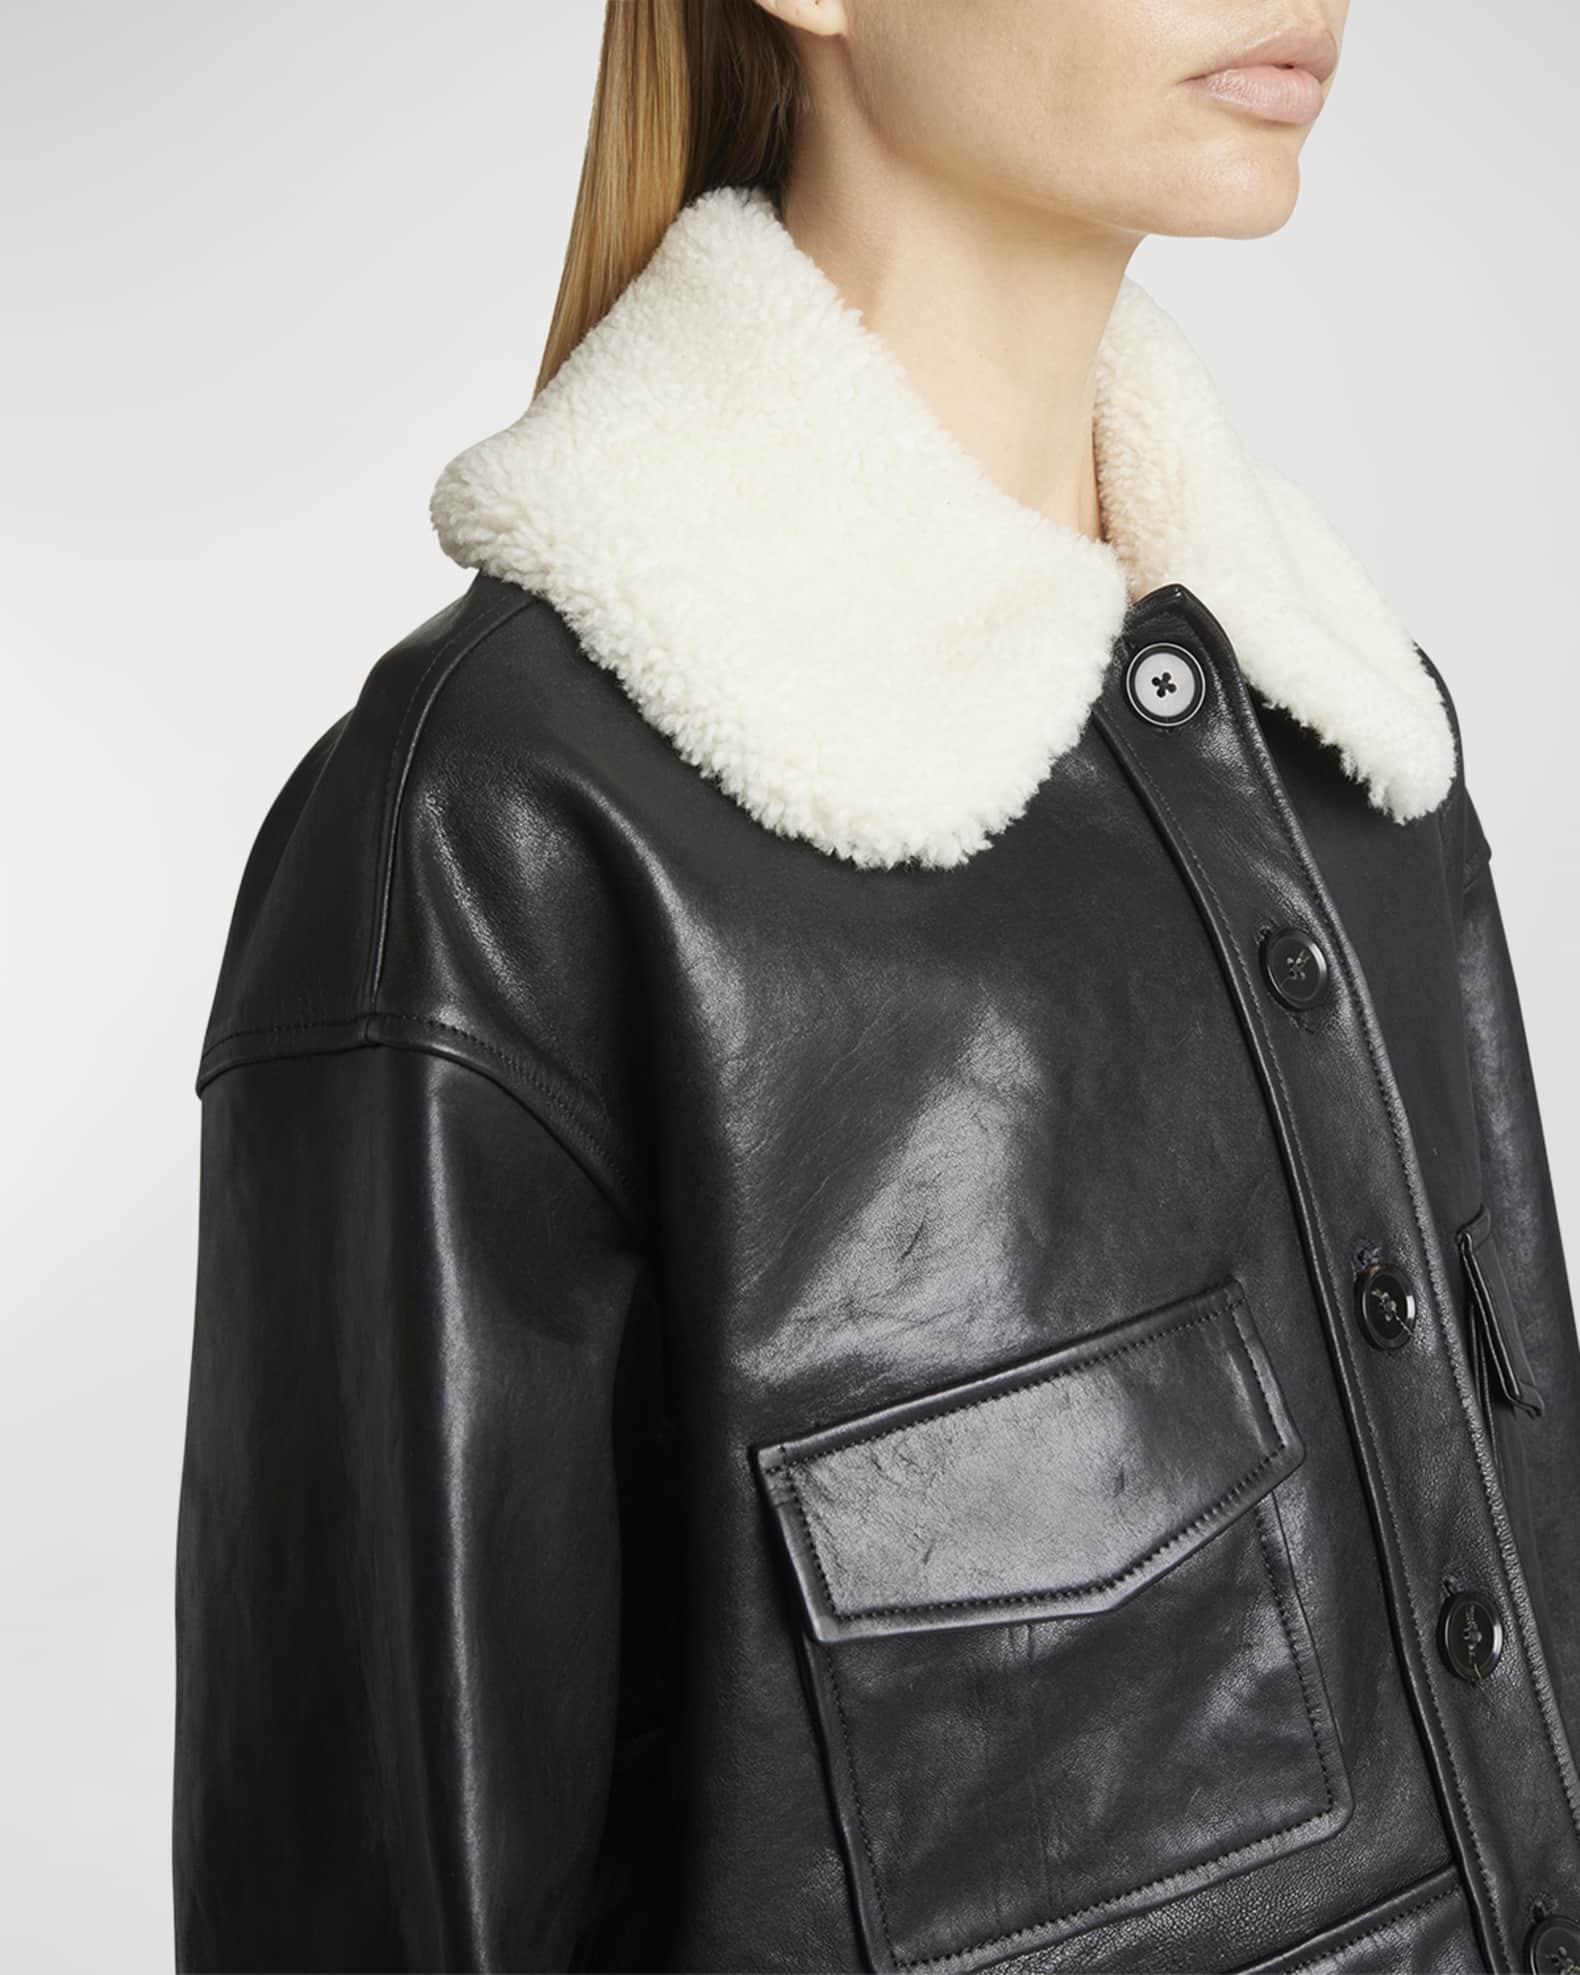 Proenza Schouler Judd Leather Jacket with Shearling Collar | Neiman Marcus